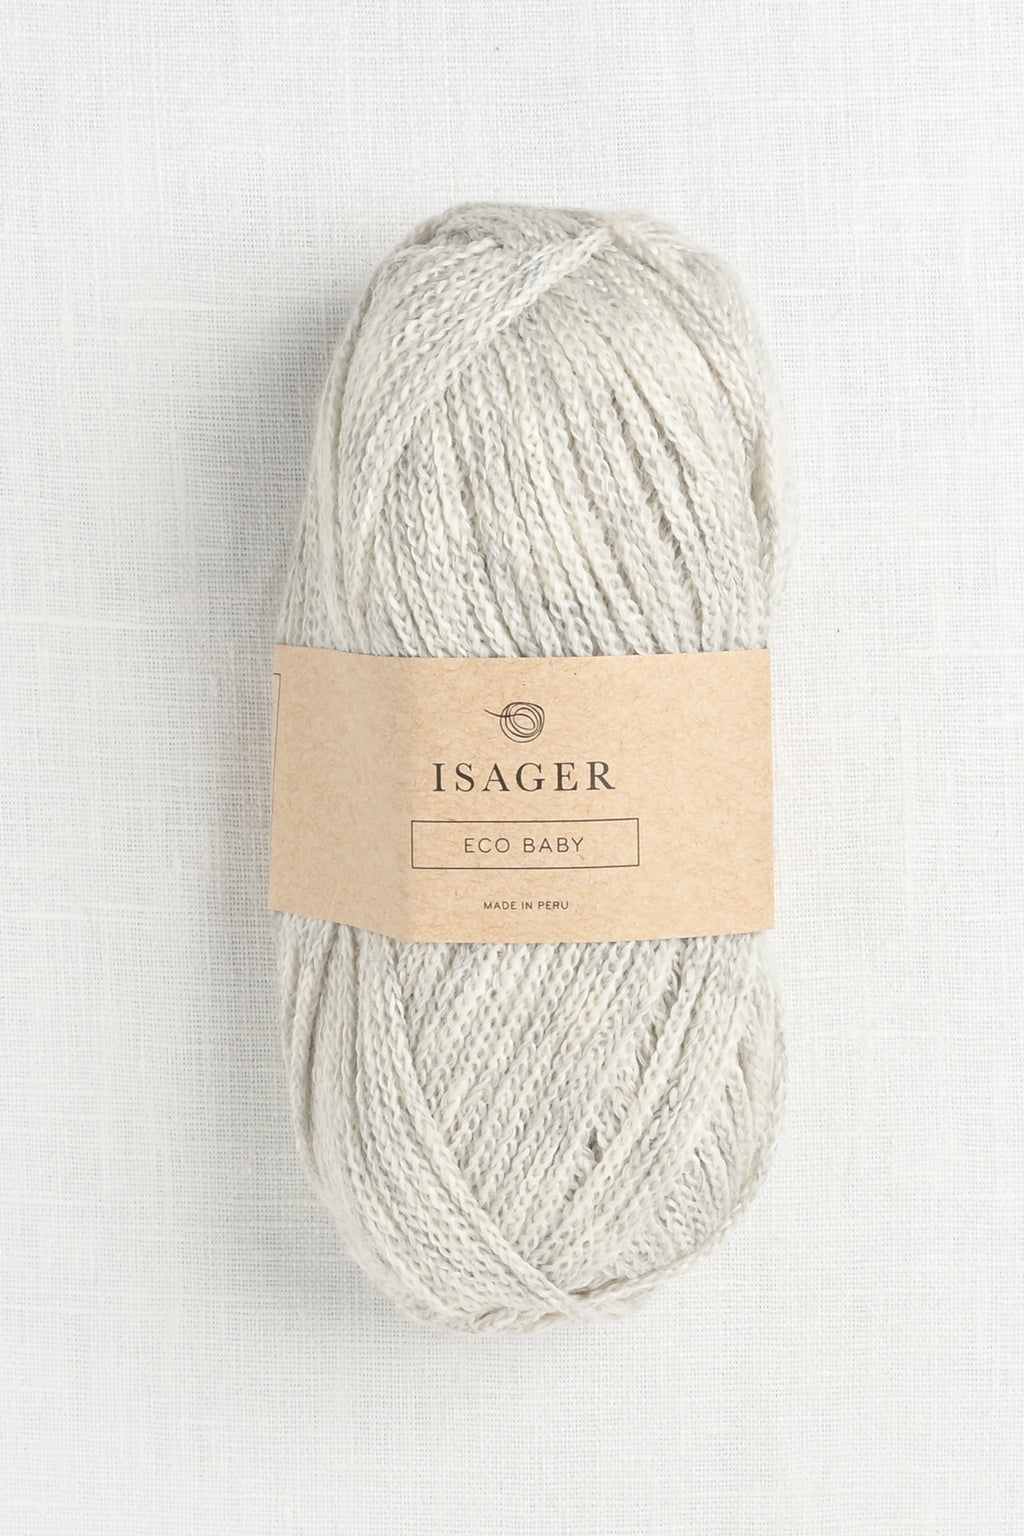 isager eco baby e2s light grey heather undyed